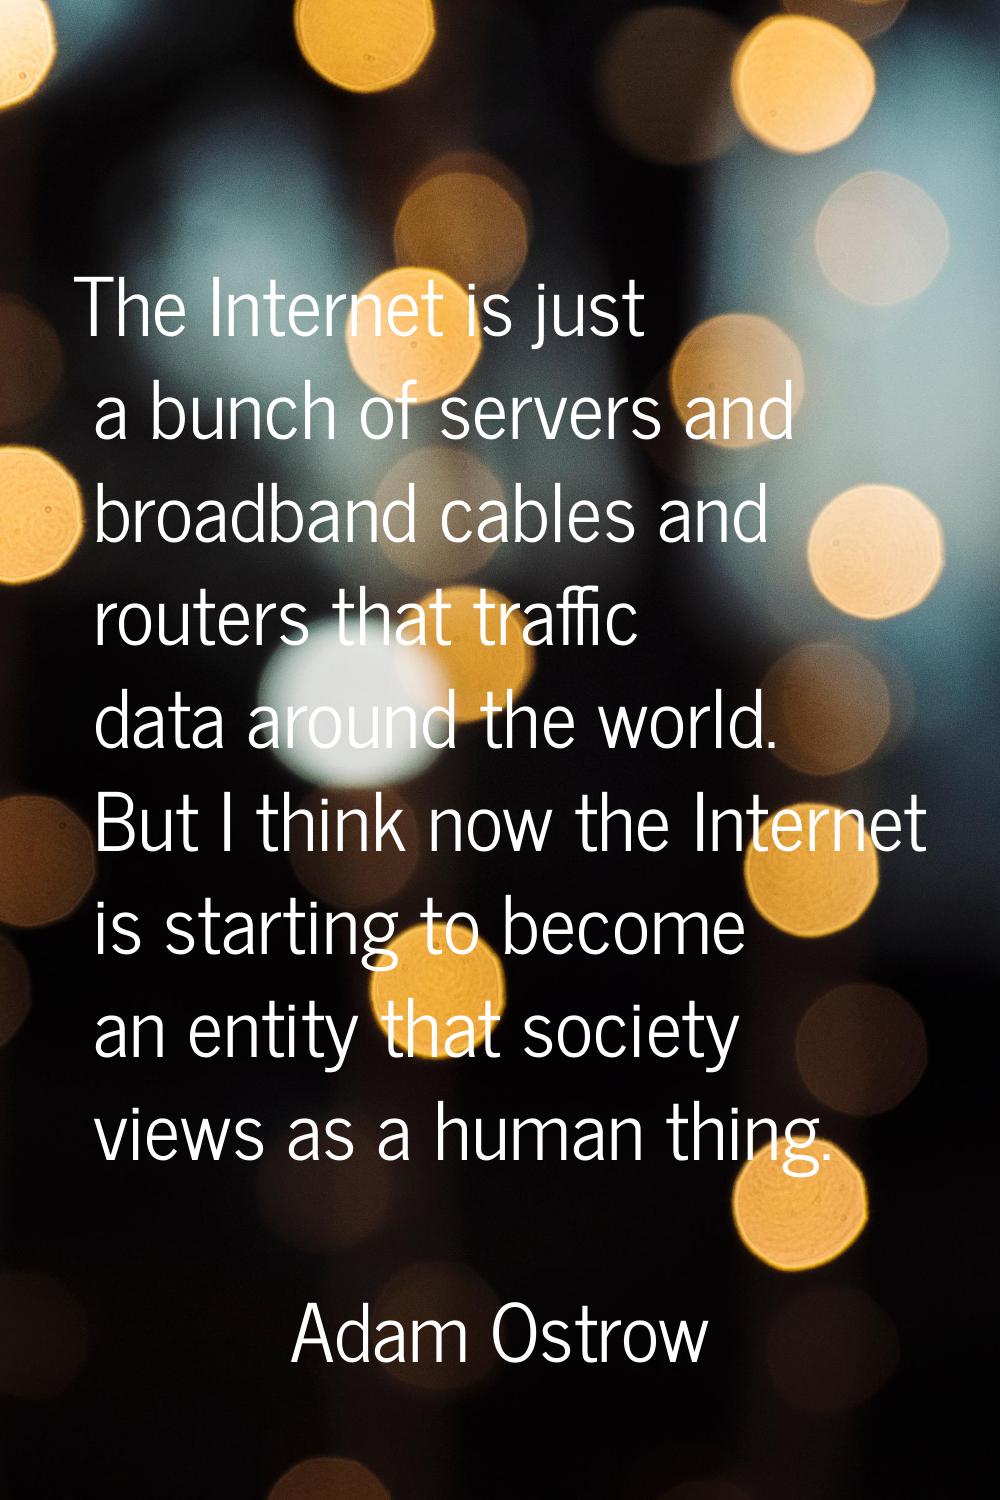 The Internet is just a bunch of servers and broadband cables and routers that traffic data around t